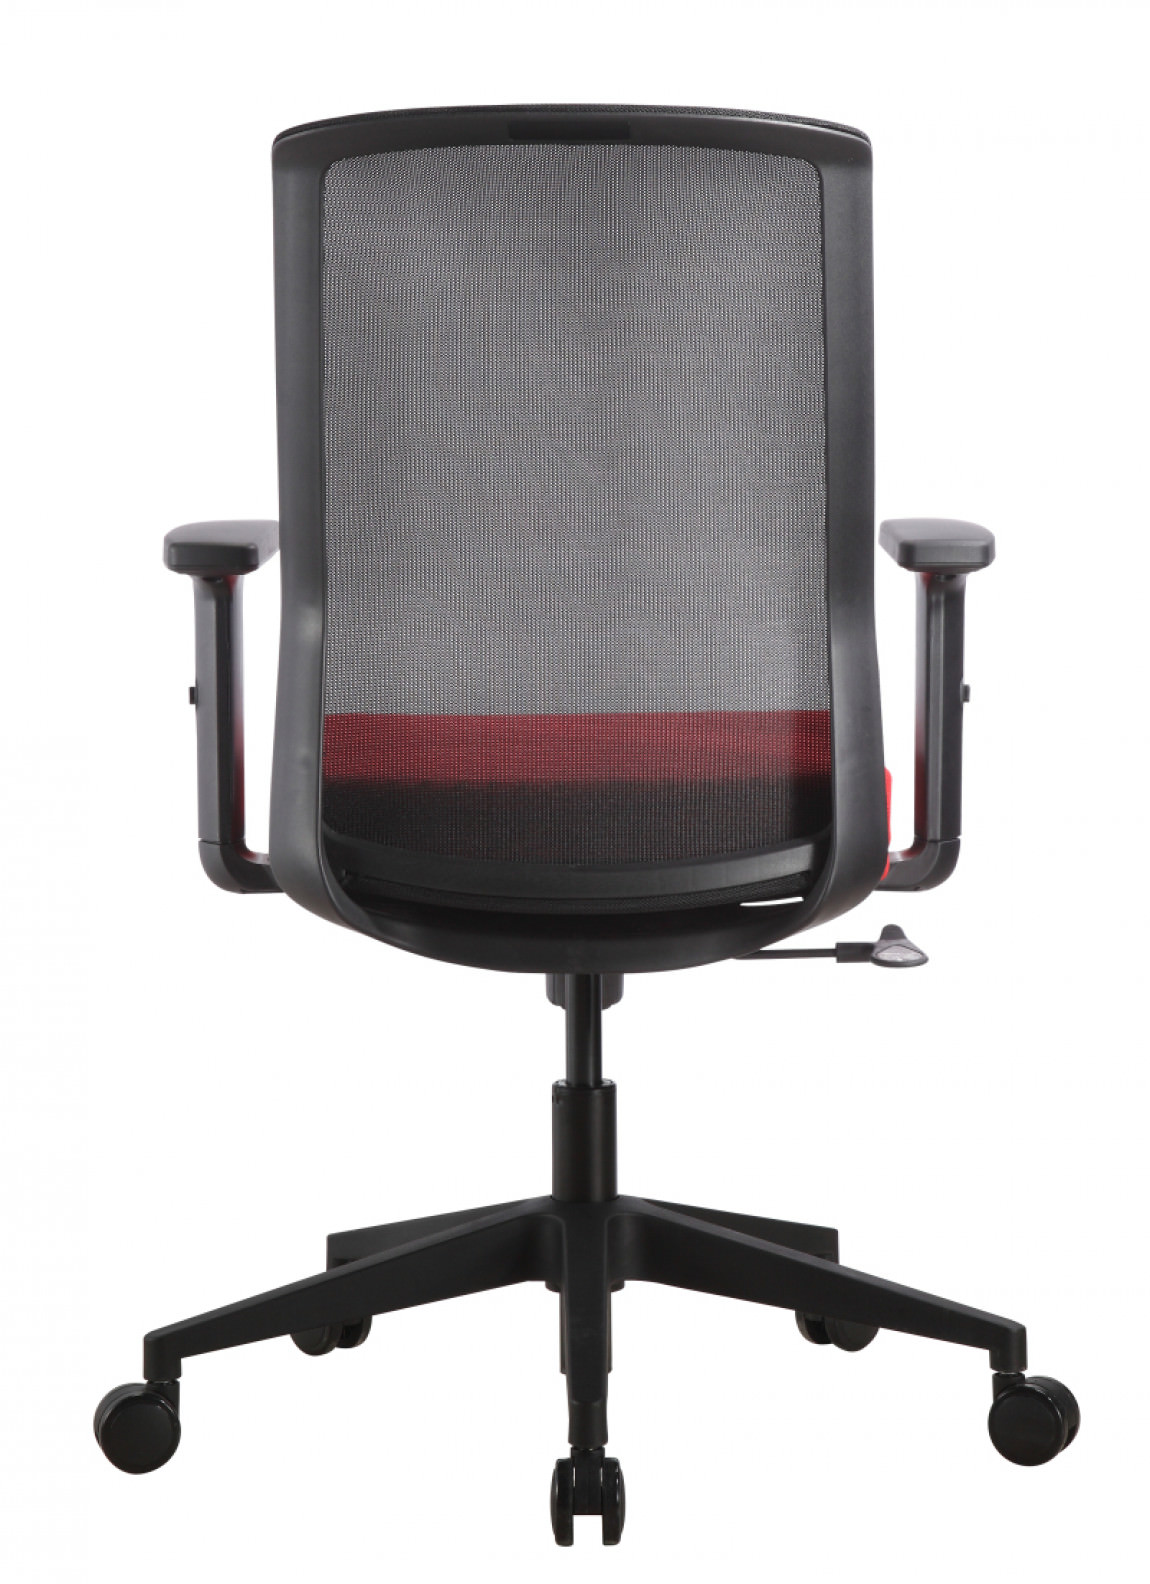 Mesh Back Task Chair with Red Seat Cover